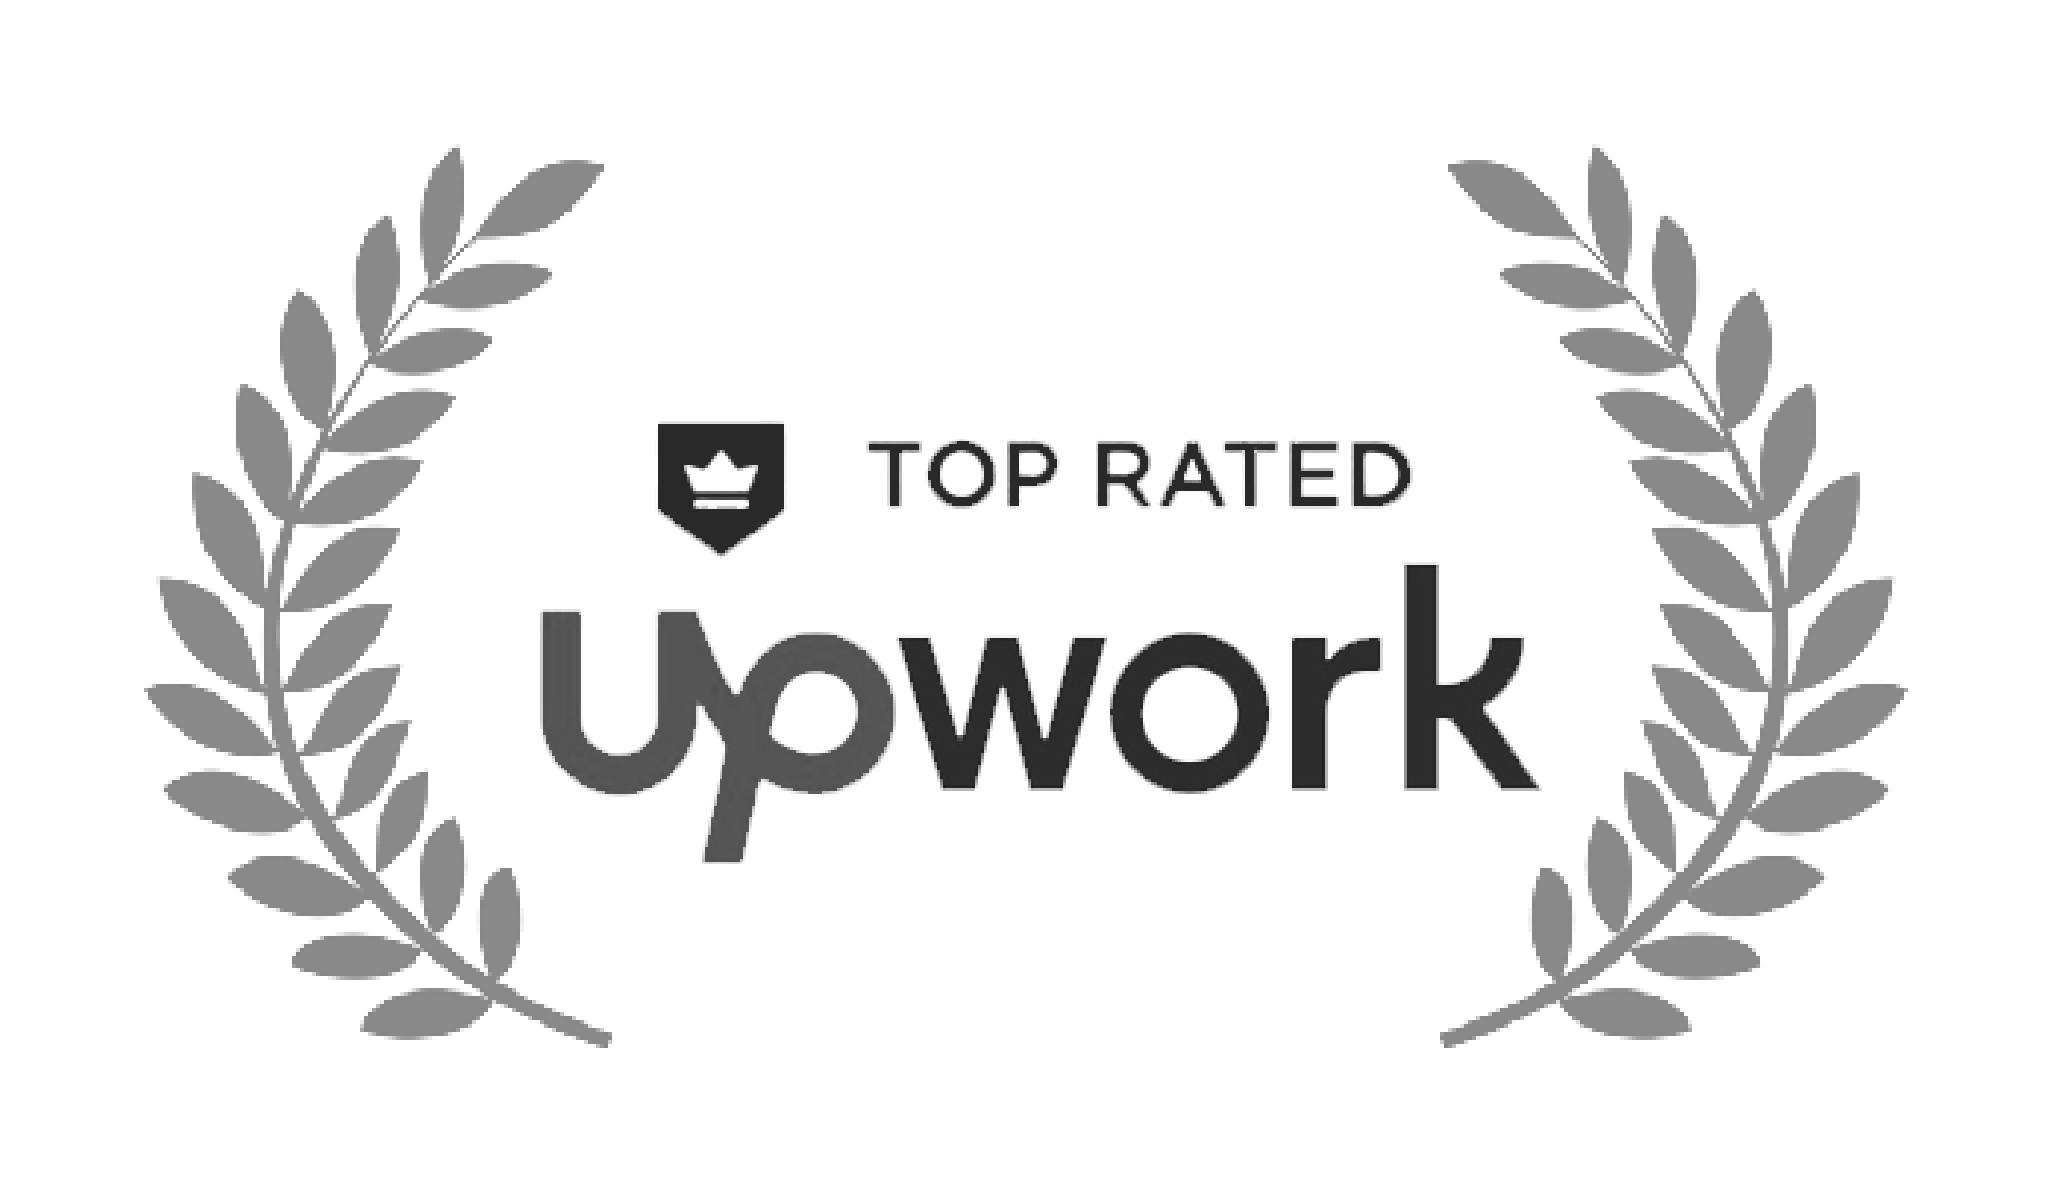 Top Rated by Upwork as Trusted Web Development Company in India | Sifars